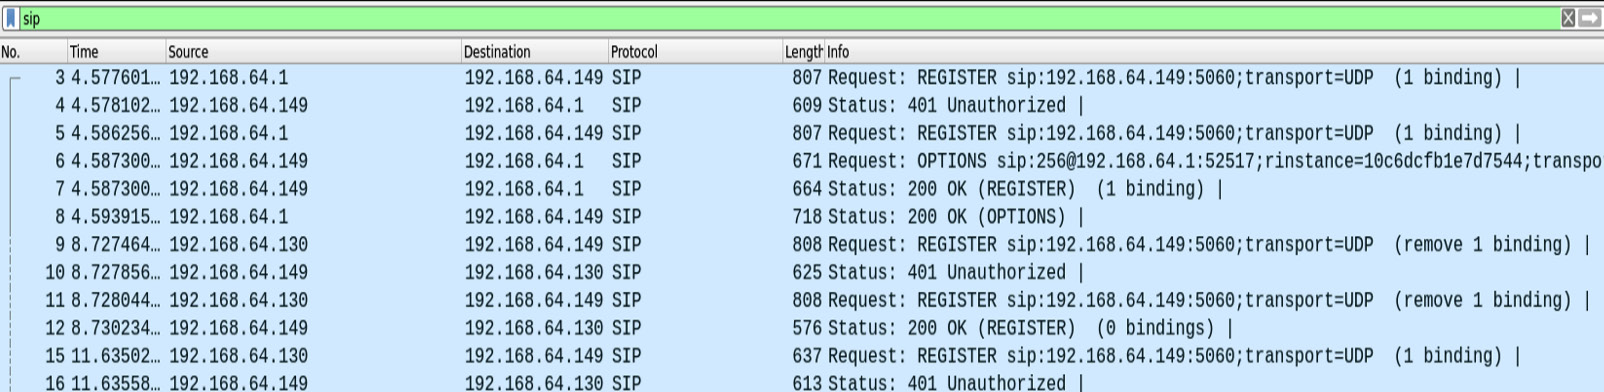 Figure 16.28 – Ongoing SIP calls in the network
